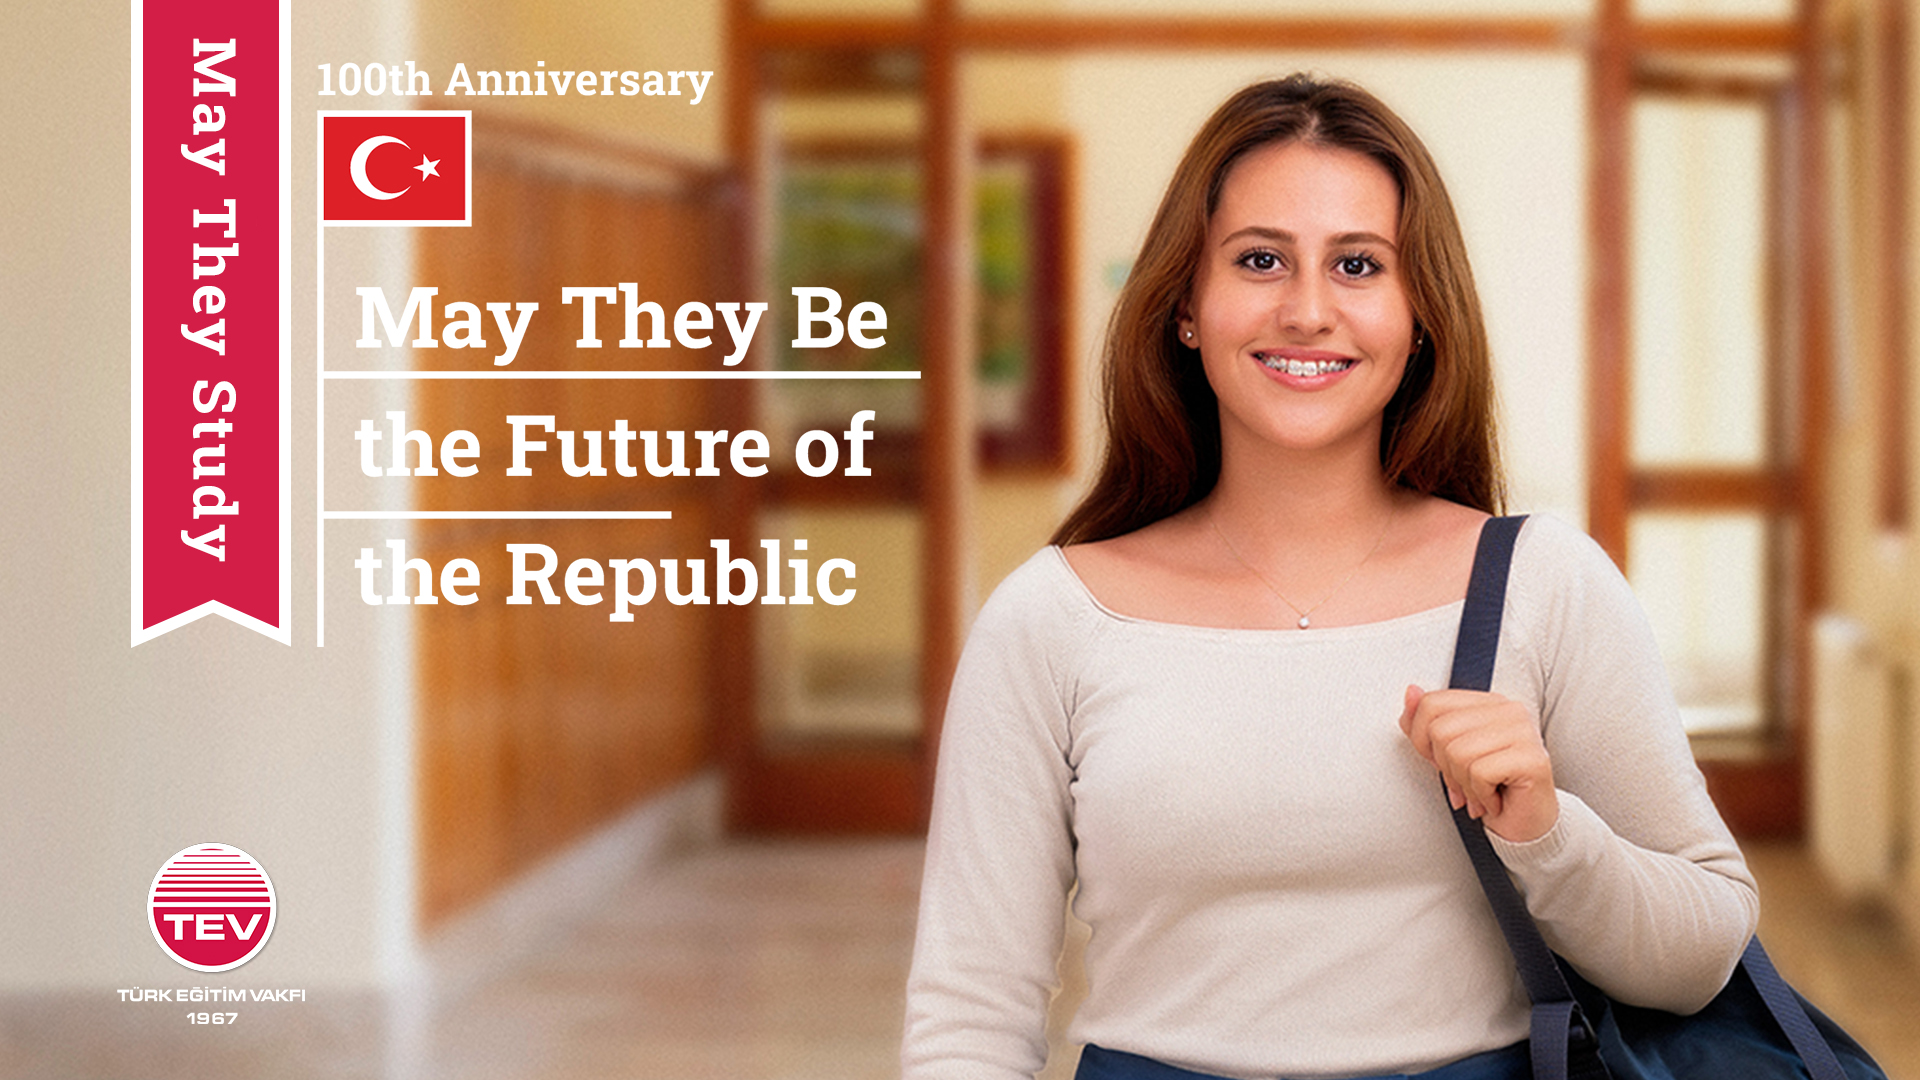 May They Study, May They Be the Future of the Republic Scholarship Fund